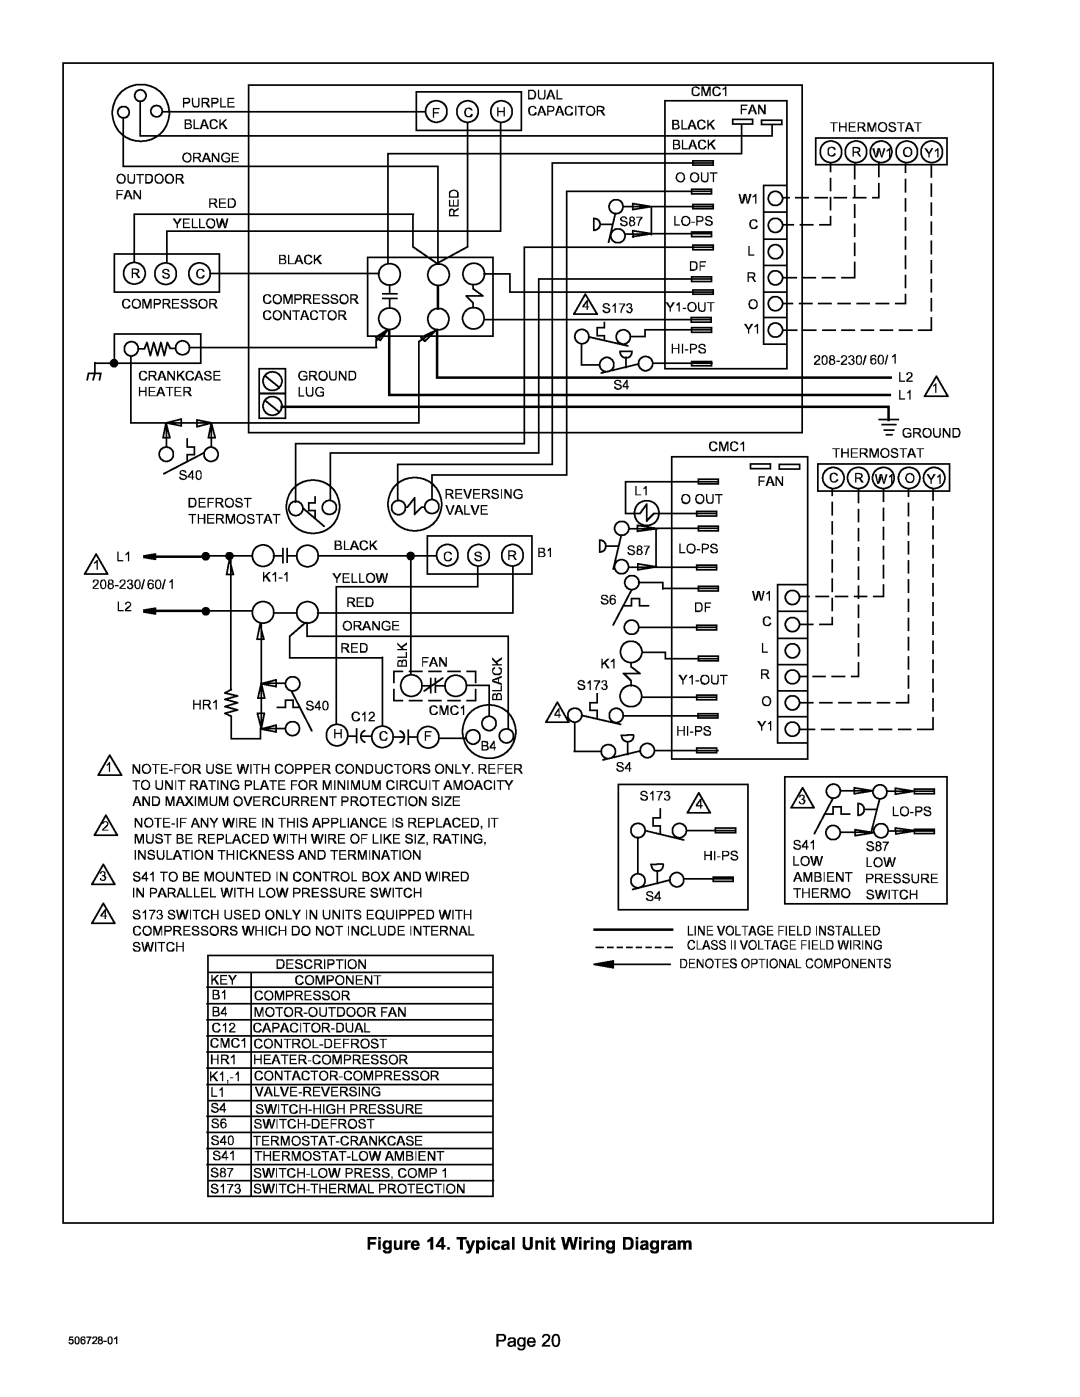 Lennox International Inc 06/11 50672801 installation instructions Typical Unit Wiring Diagram, Page, 506728−01 